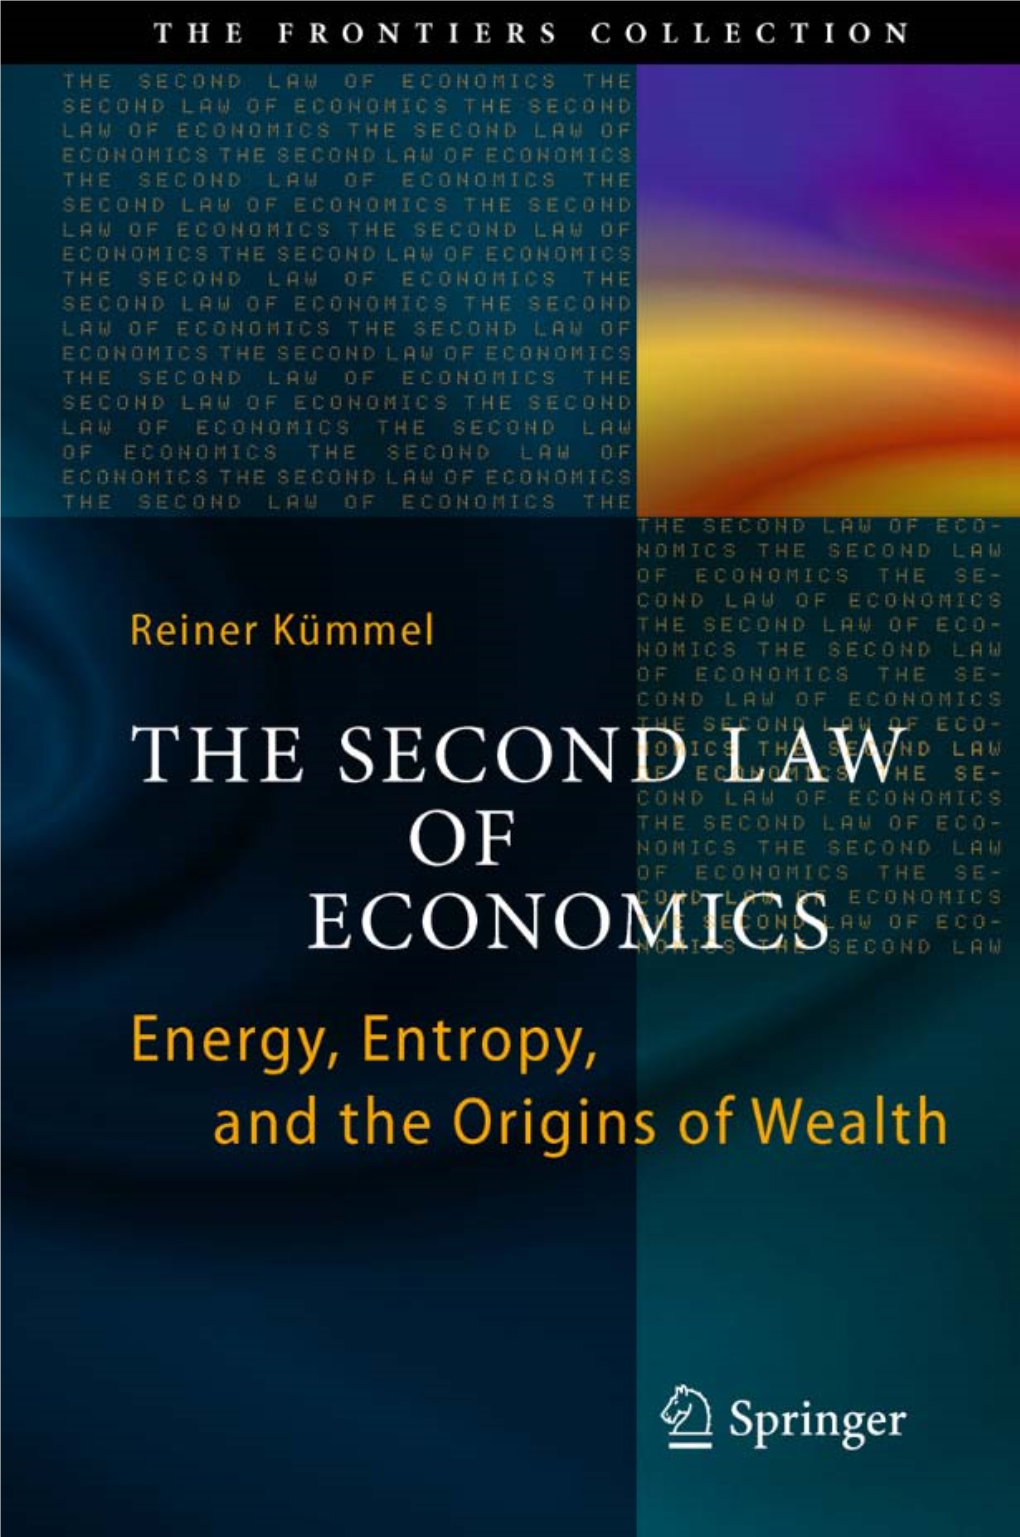 The Second Law of Economics the Frontiers Collection